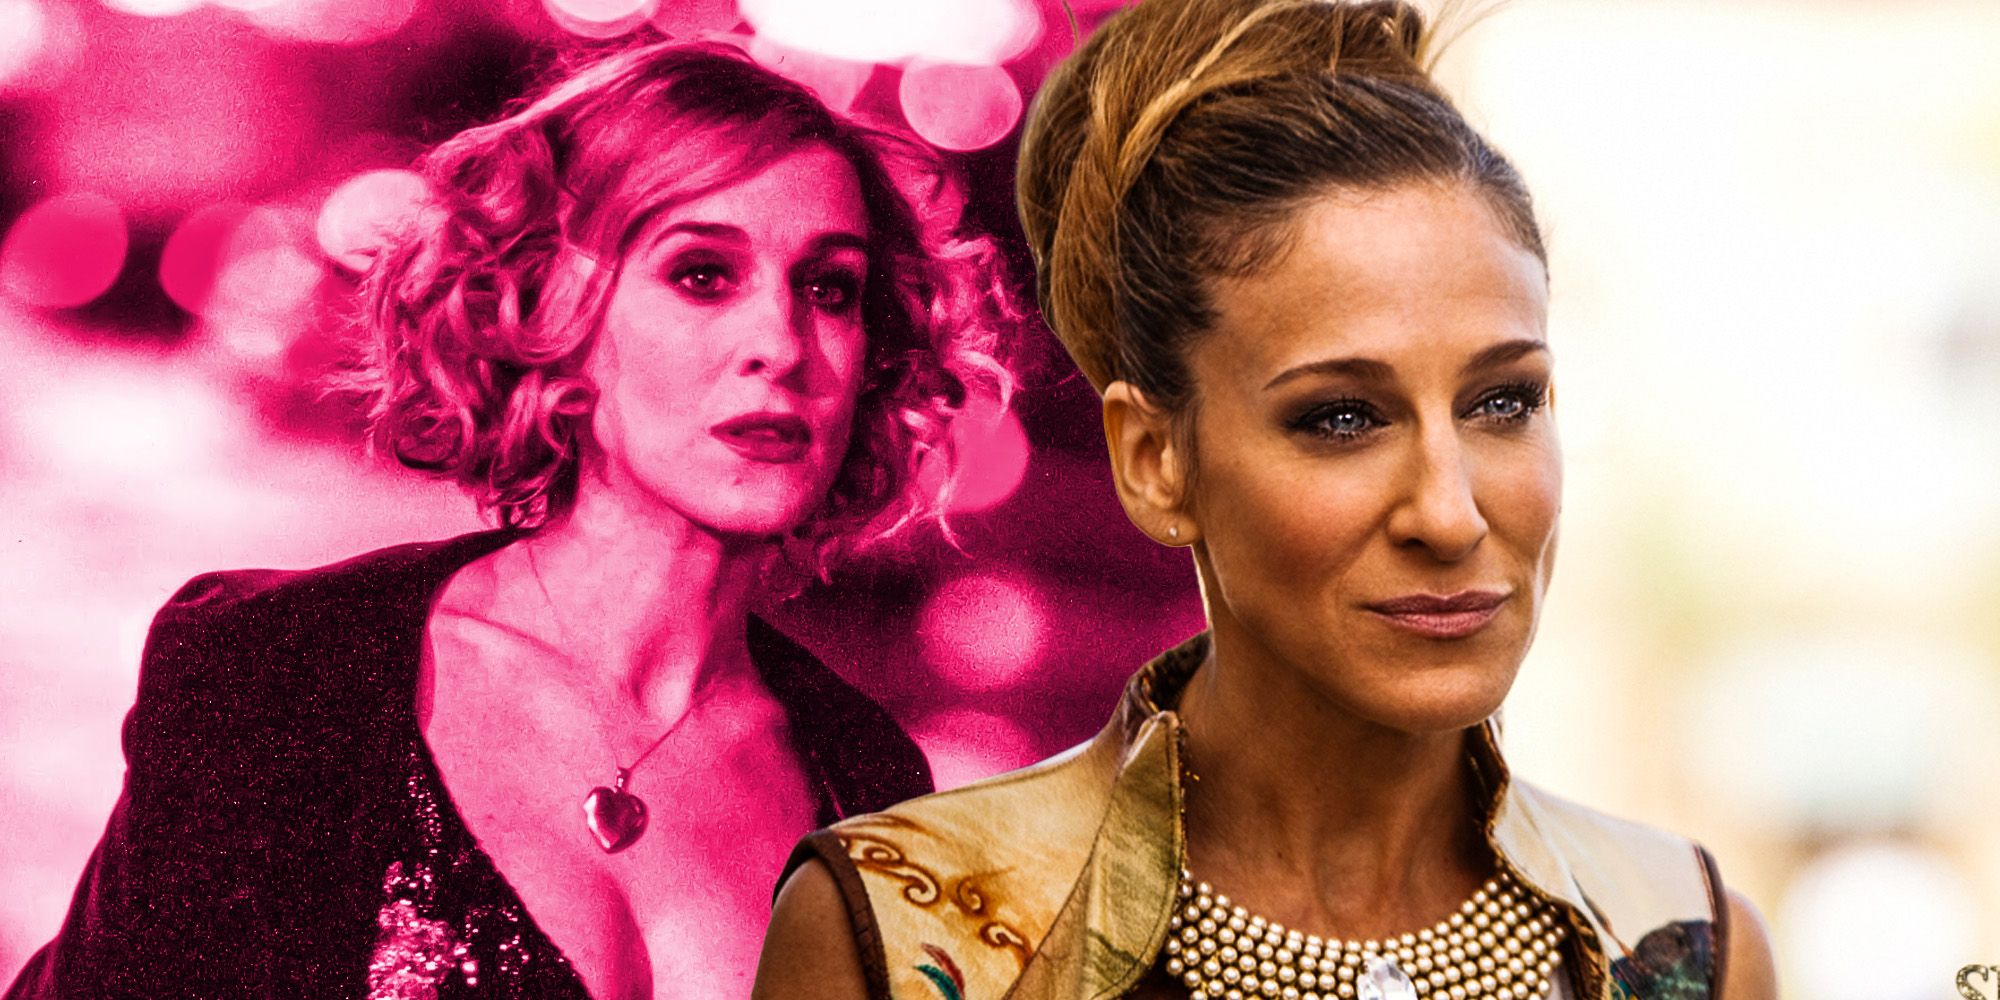  Carrie Bradshaw (Sex and the City) Old Woman Who Lives